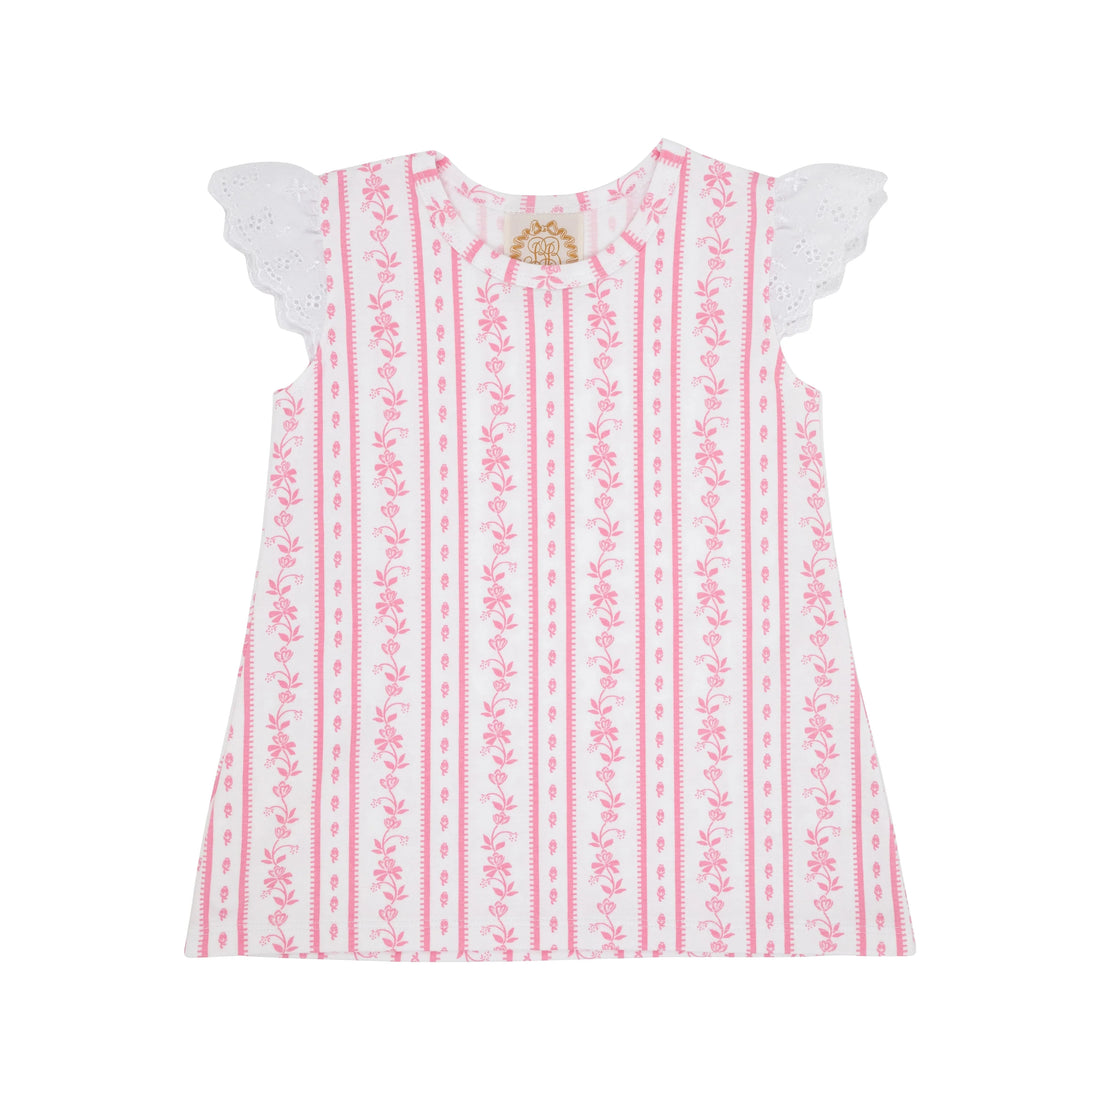 Beaufort Bonnet Sleeveless Polly Play Shirt- French Country Coterie With Eyelet Angel Sleeve